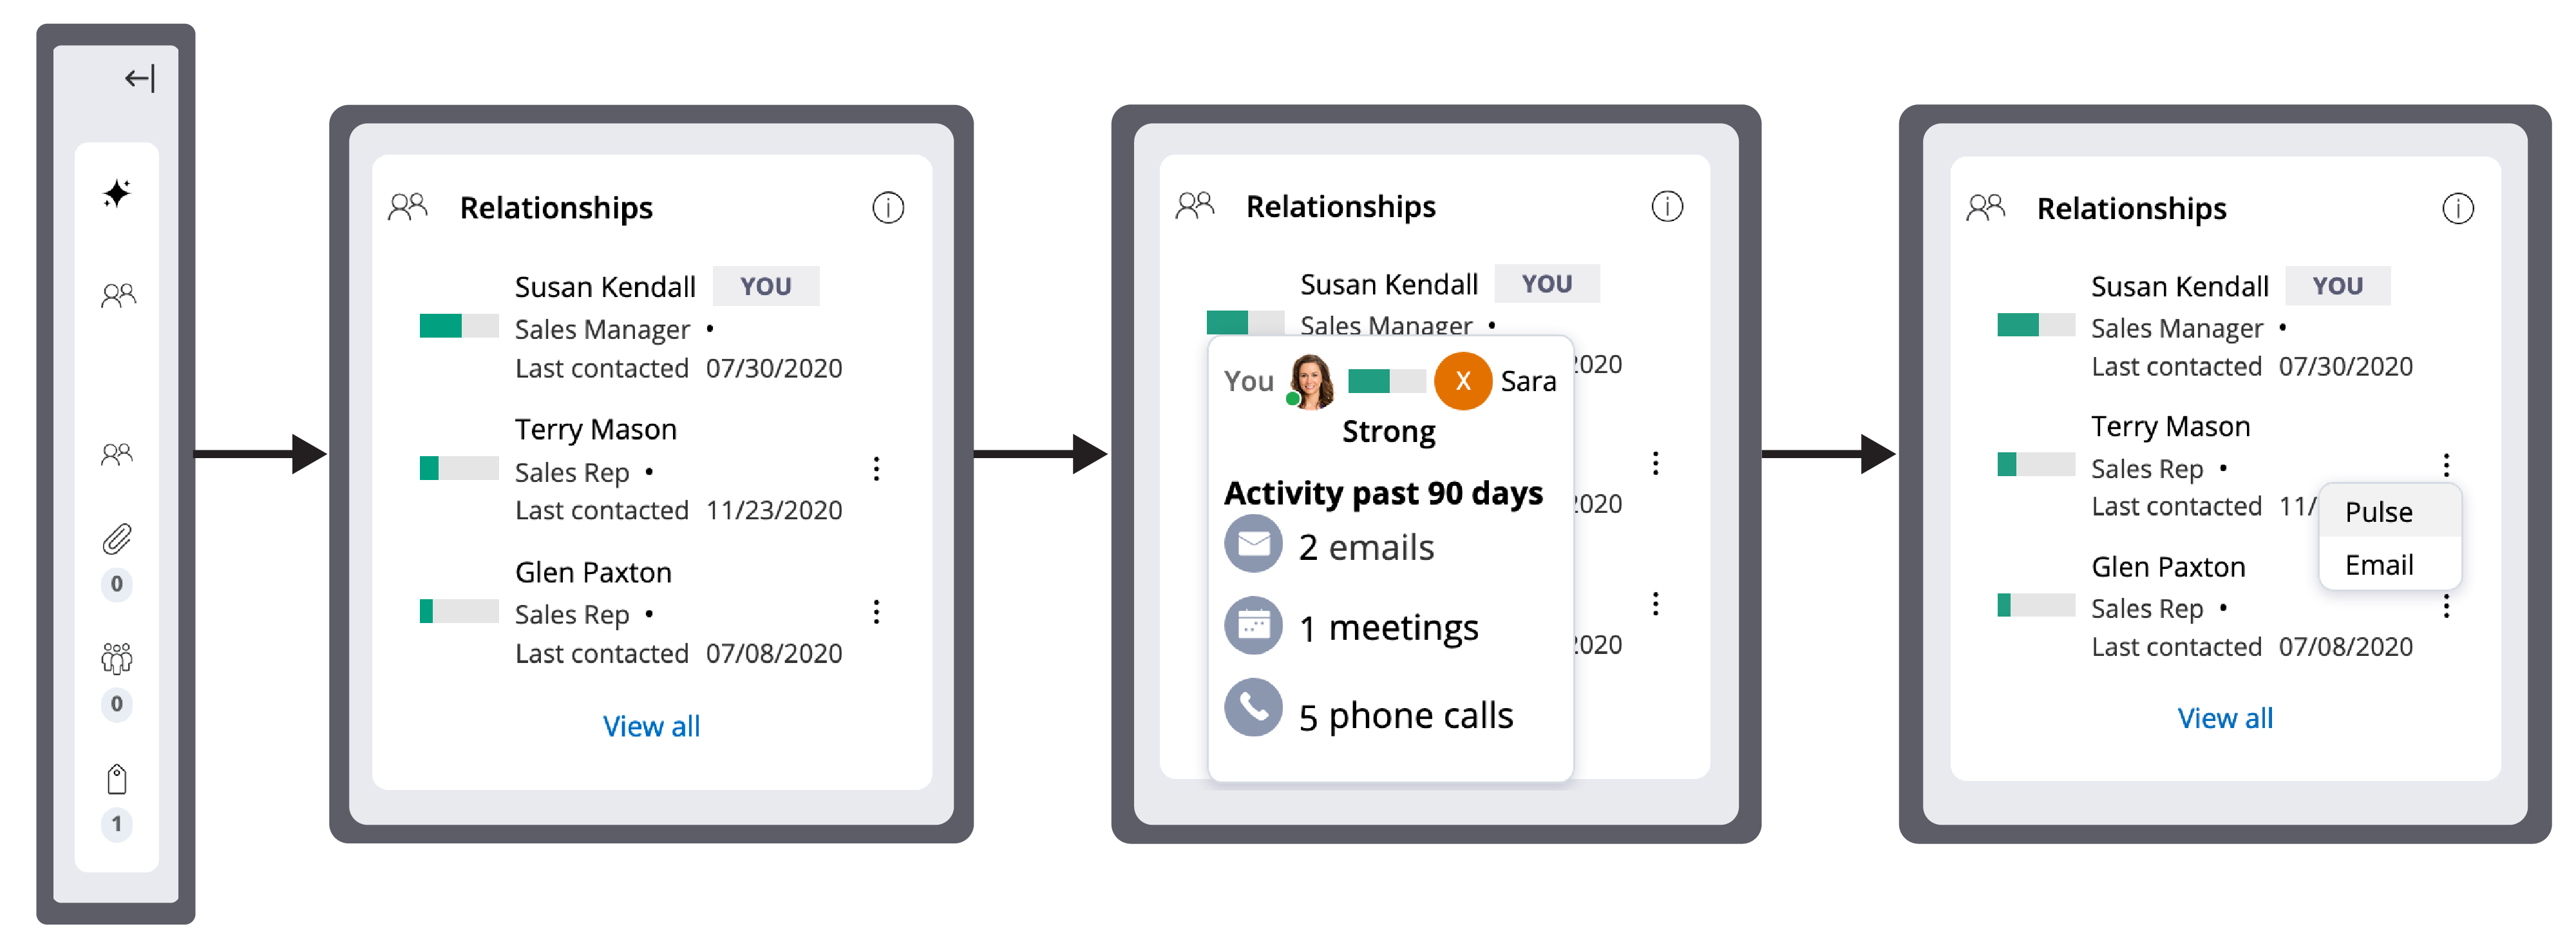 Relationship intelligence user actions are displayed in groups, determined by the system.